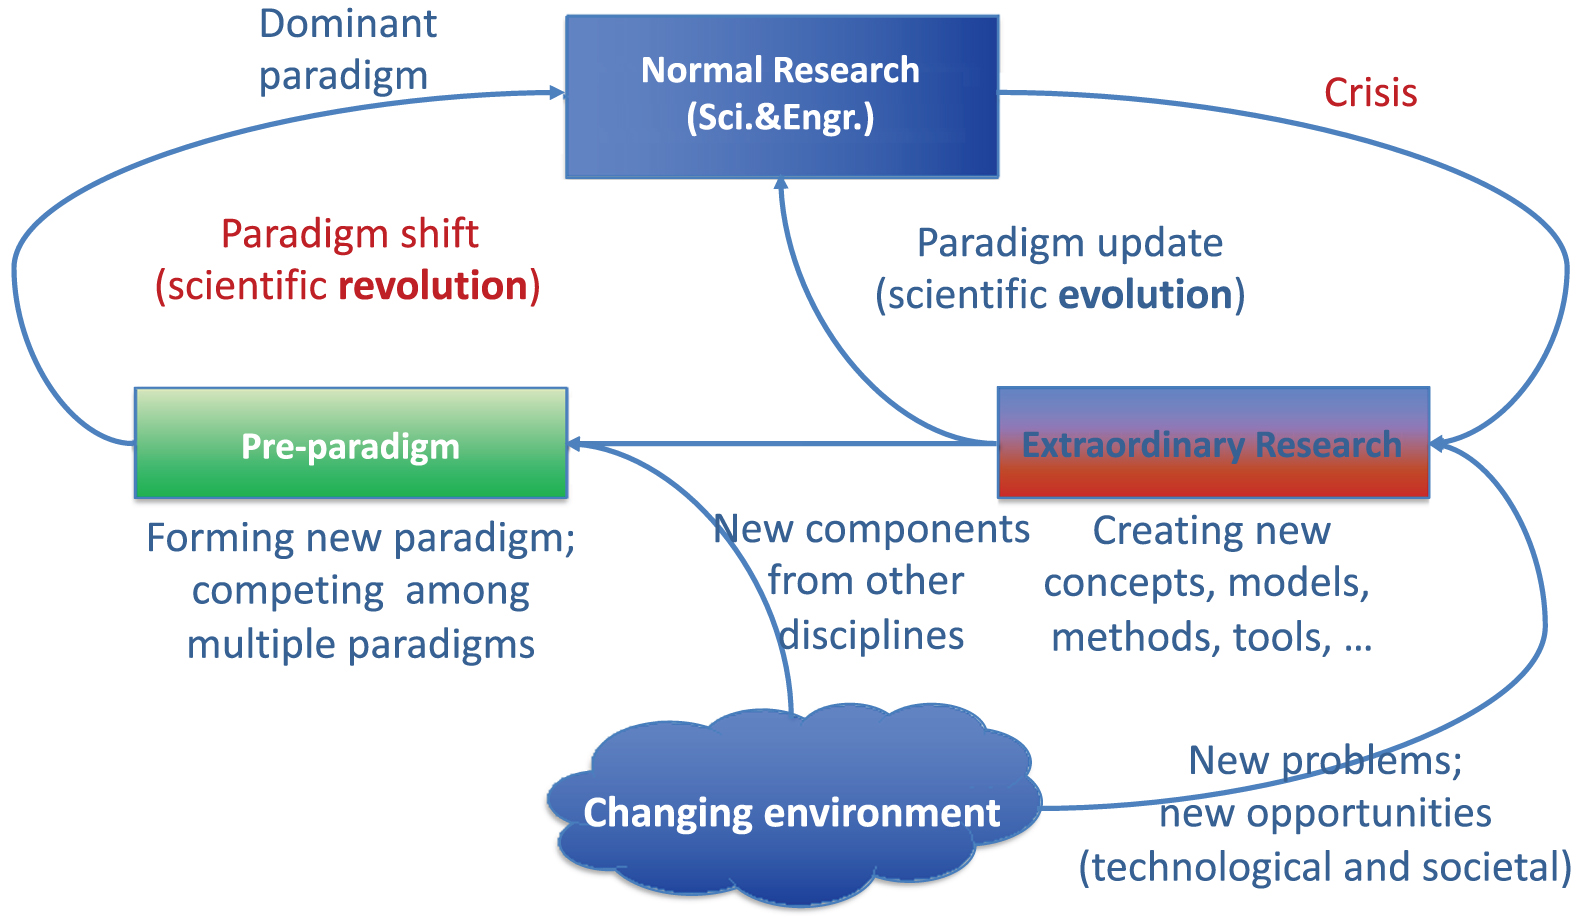 A view of paradigm shifts, based on Kuhn’s structure of scientific revolutions (Kuhn, 1962).